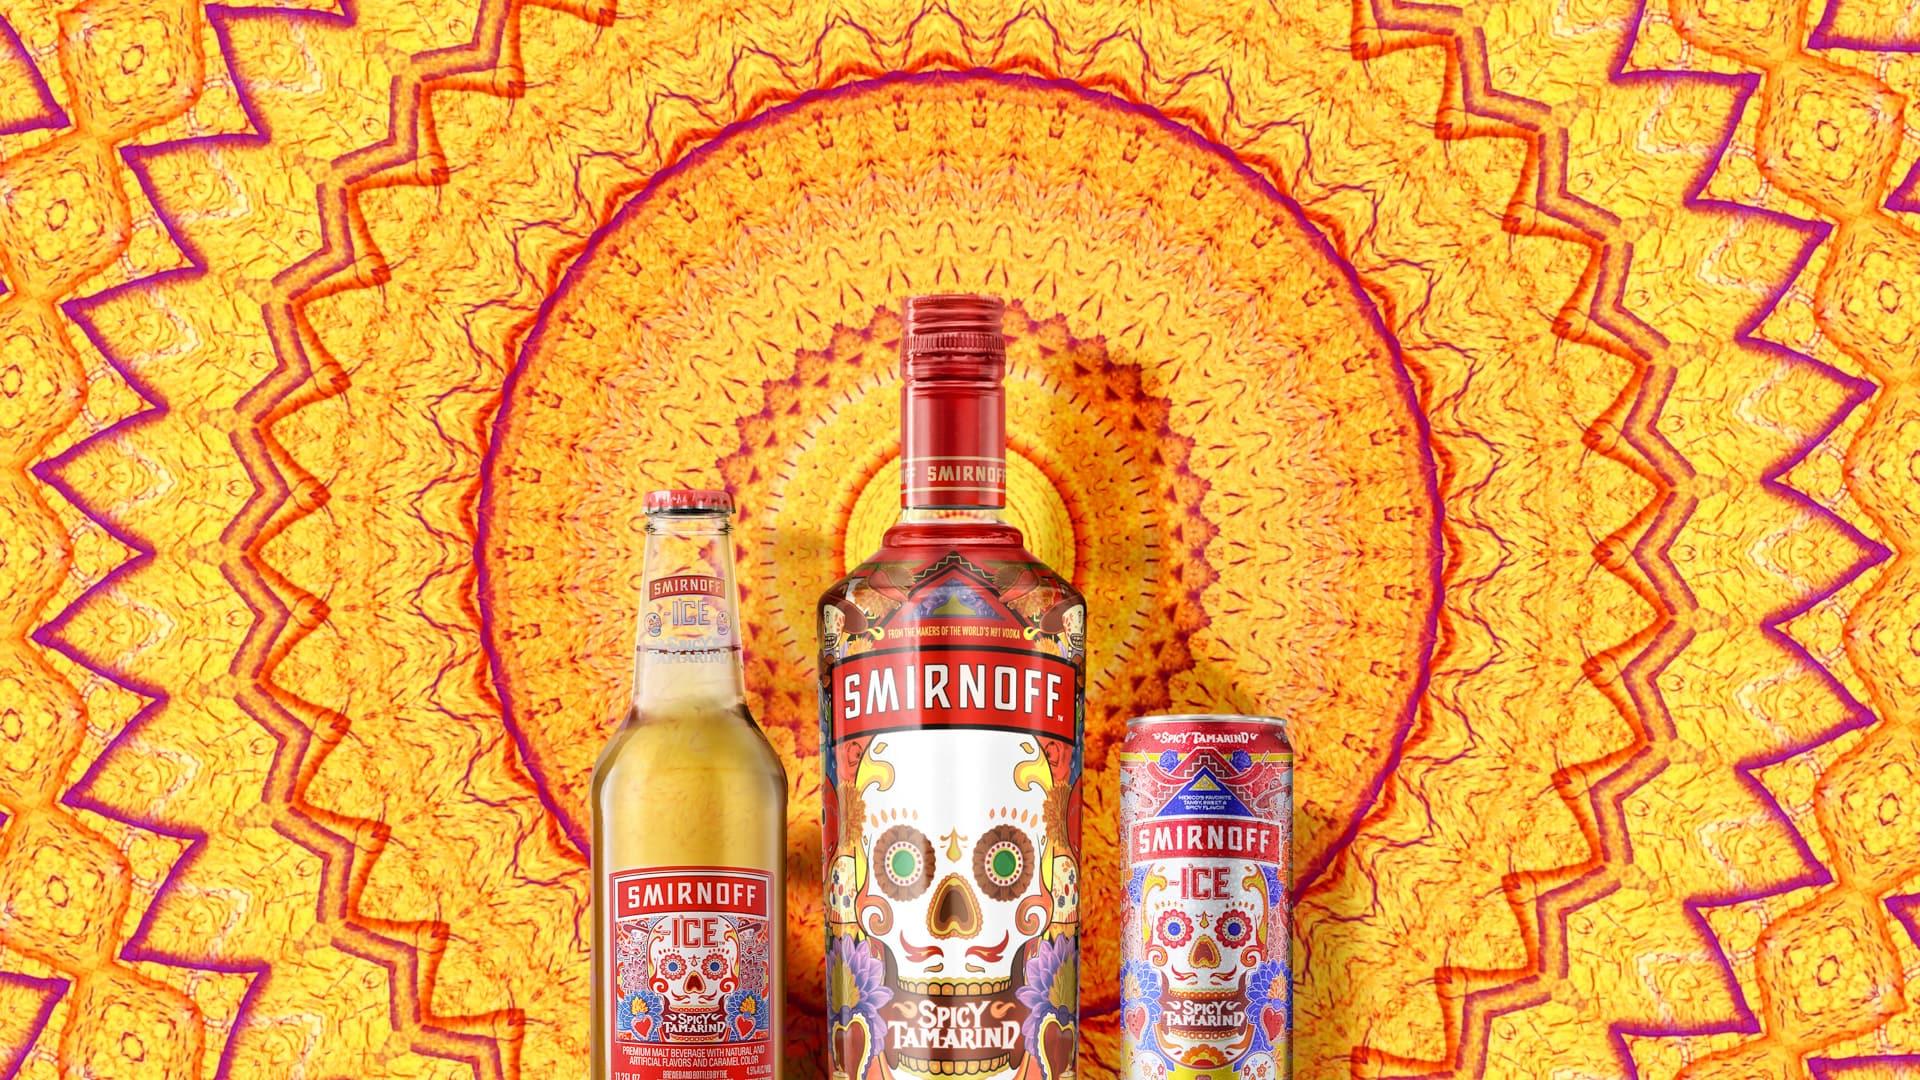 Smirnoff Spicy Tamarind products on colorful background